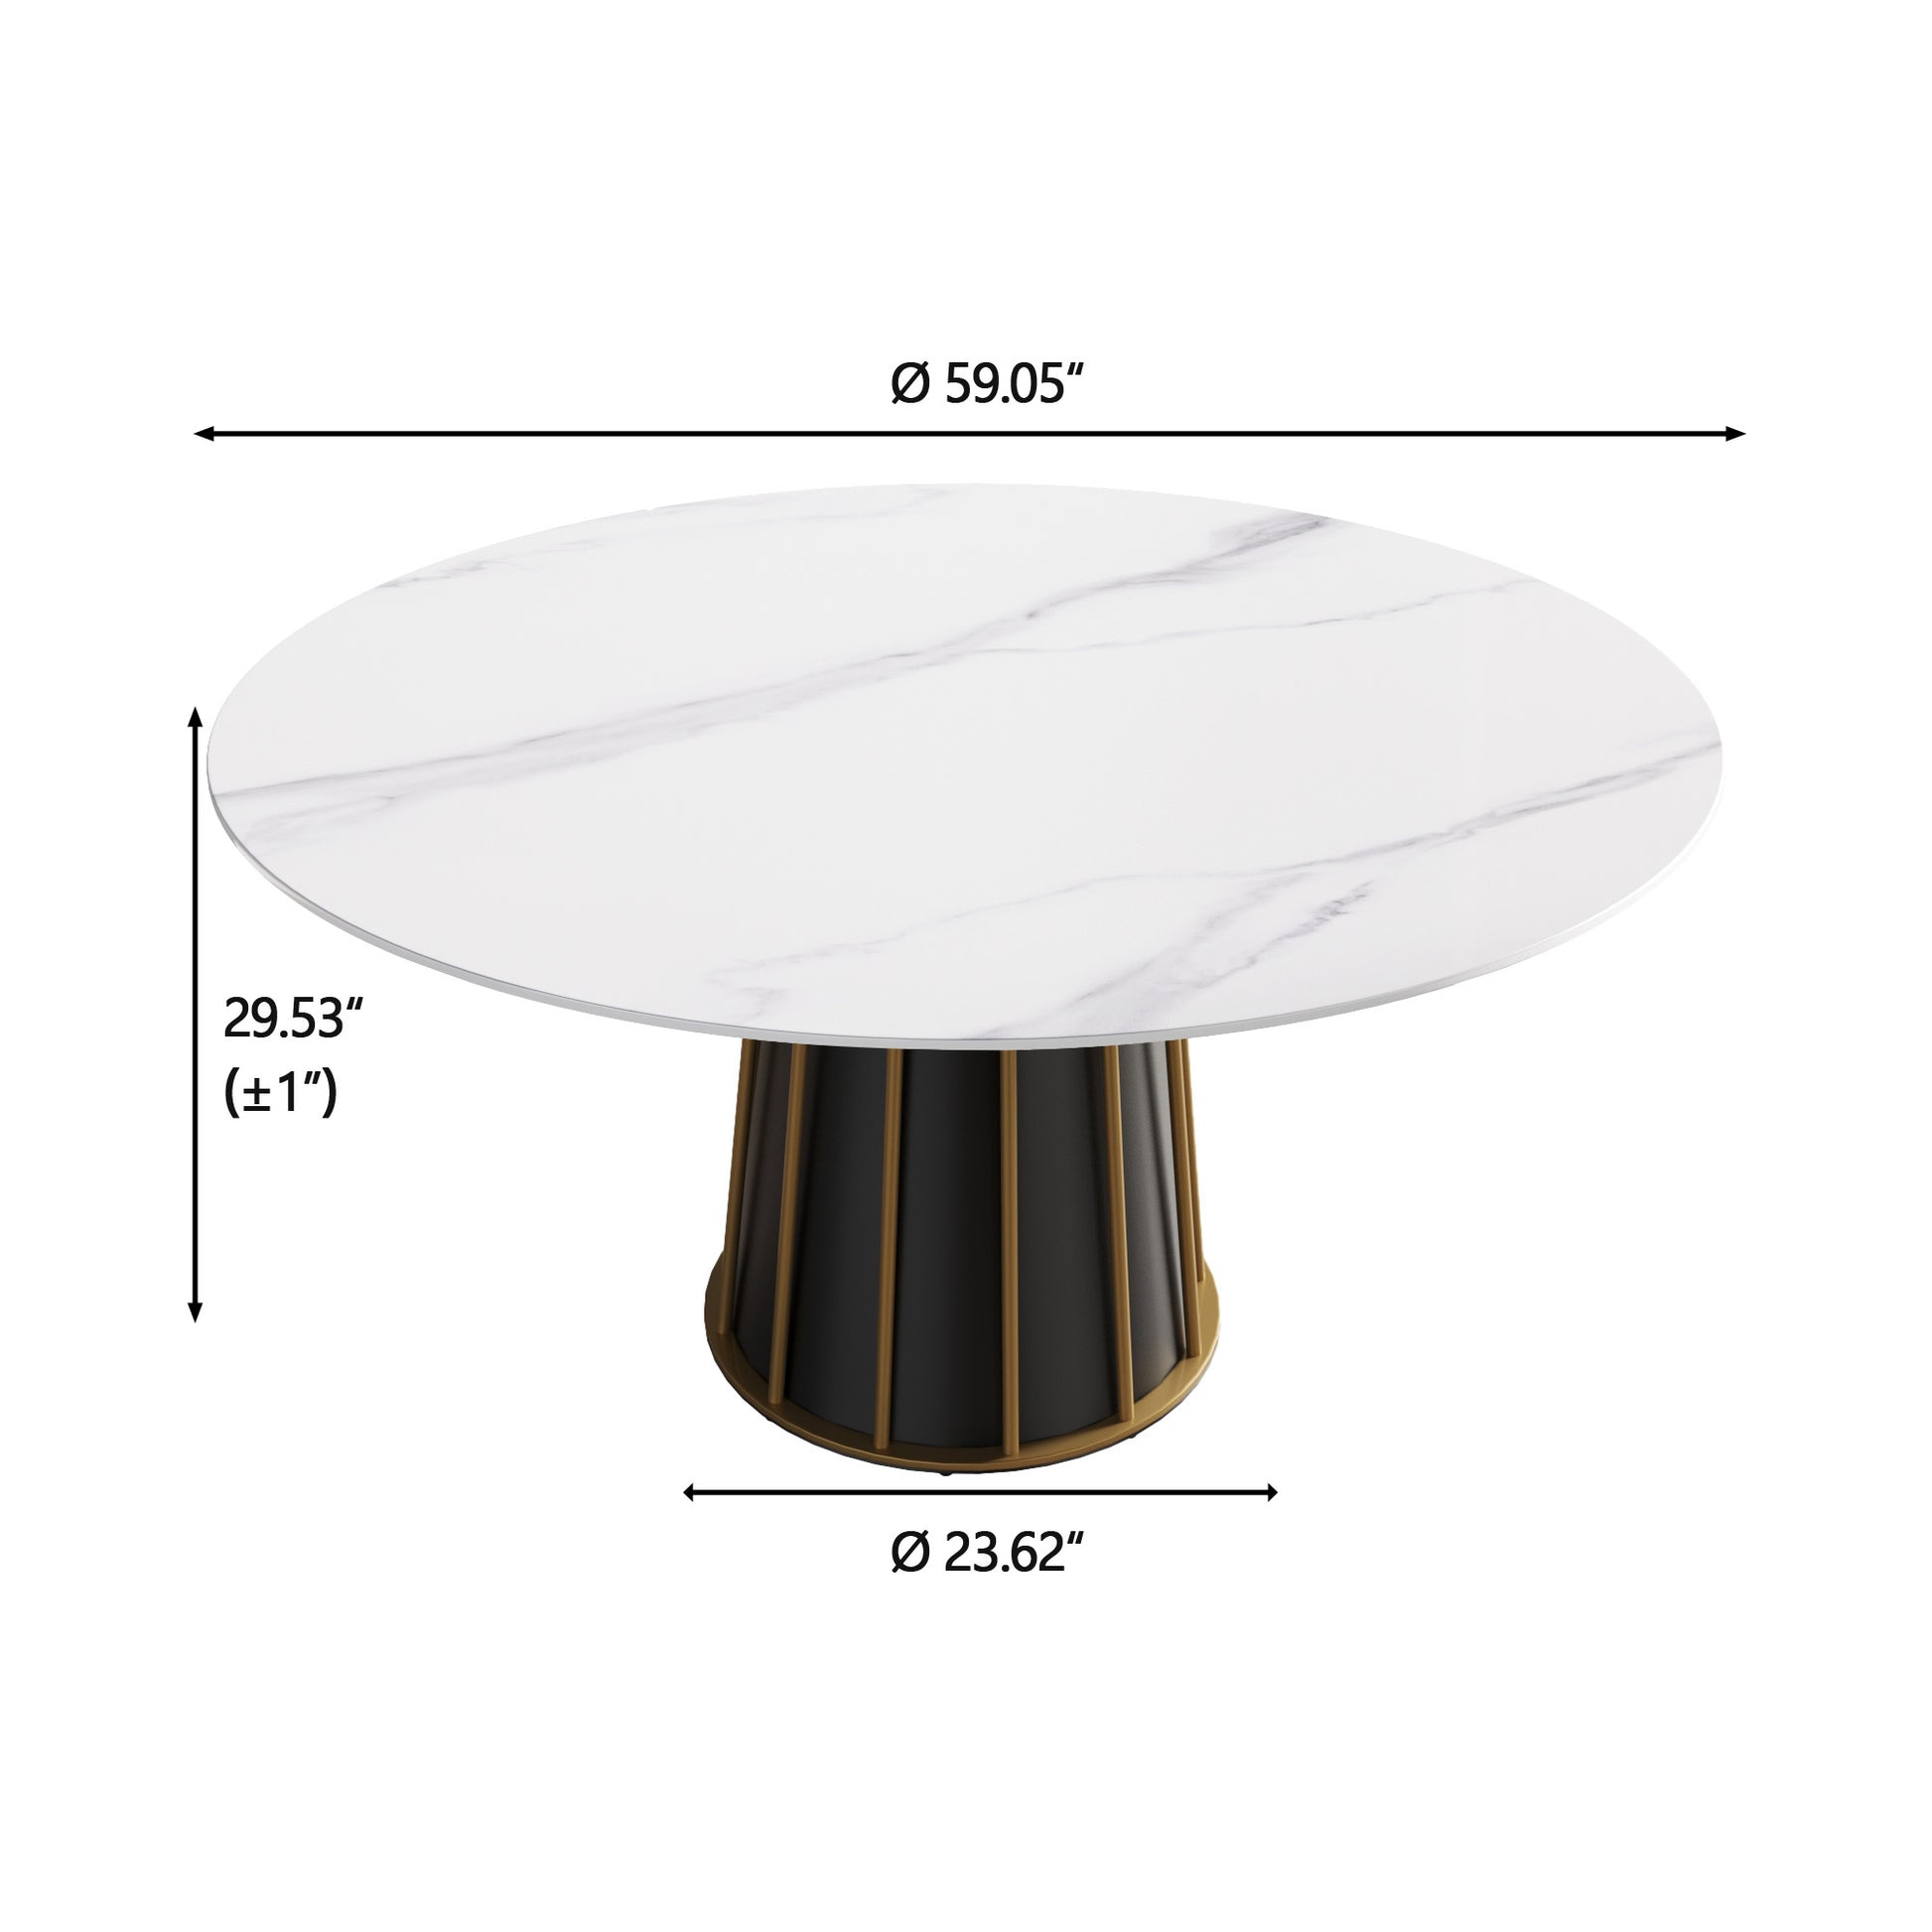 59.05 "Modern white artificial stone round dining white-dining room-plywood-sintered stone